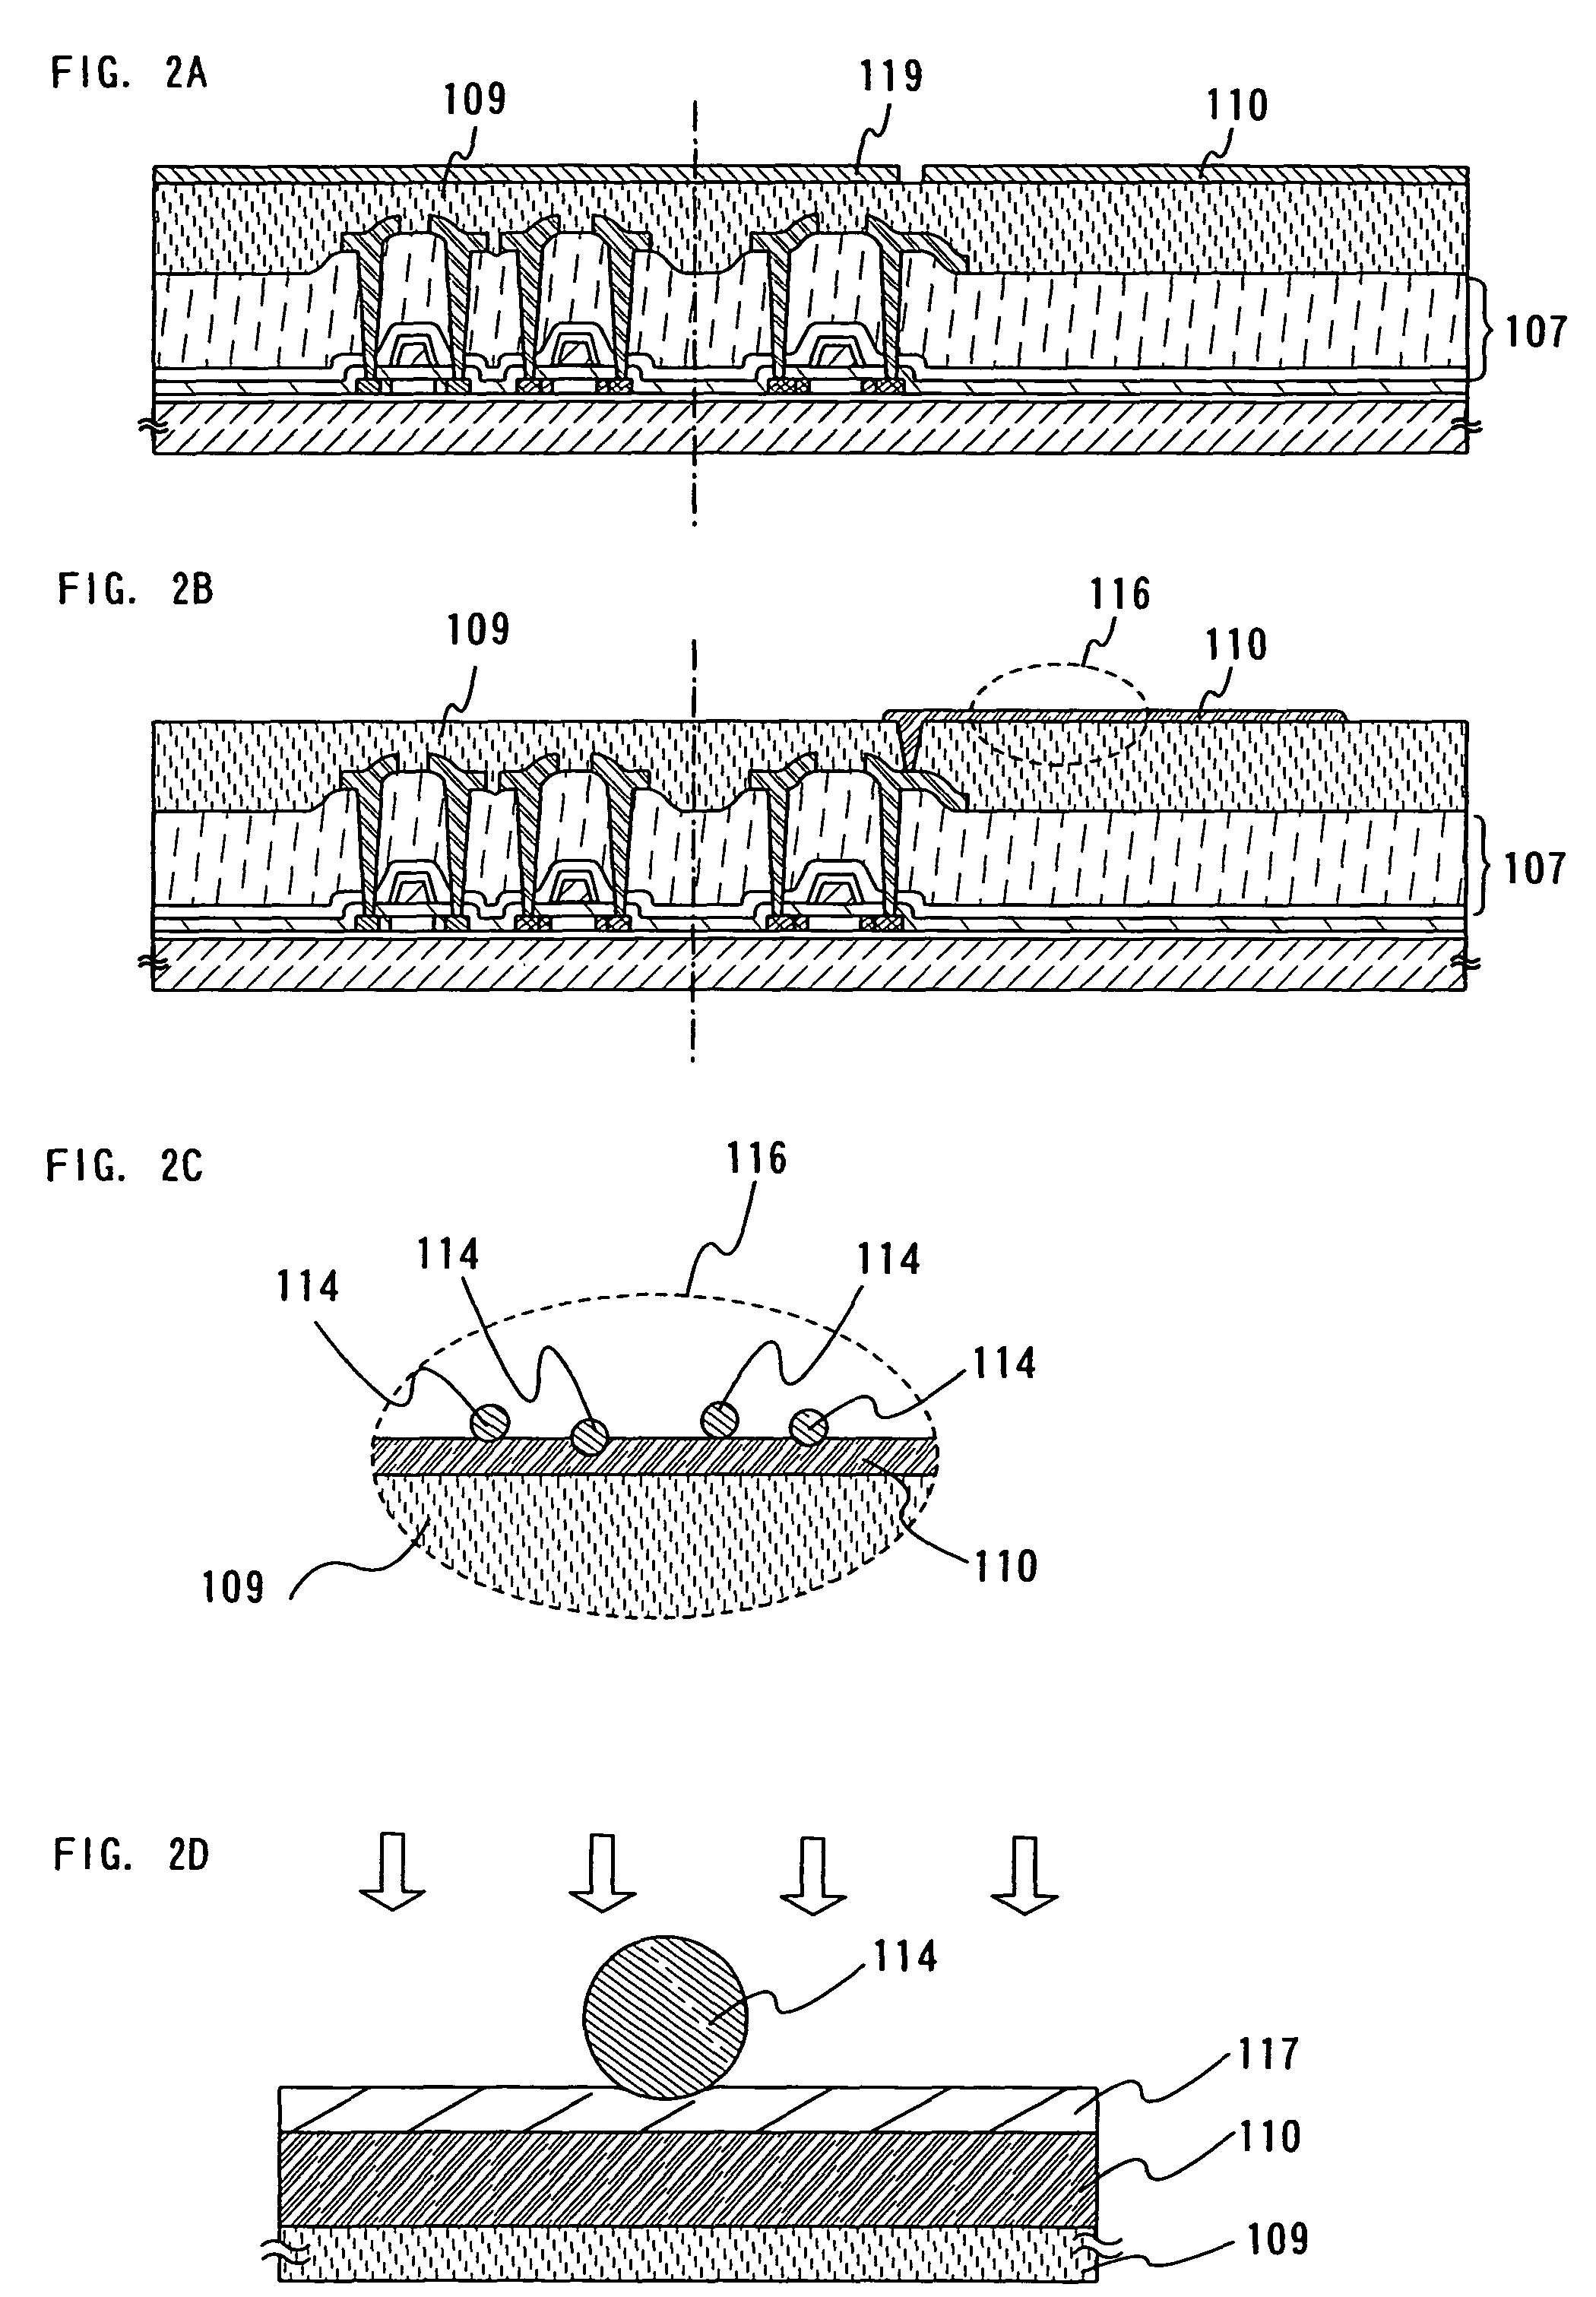 Method for manufacturing semiconductor device comprising the step of forming nitride/oxide by high-density plasma